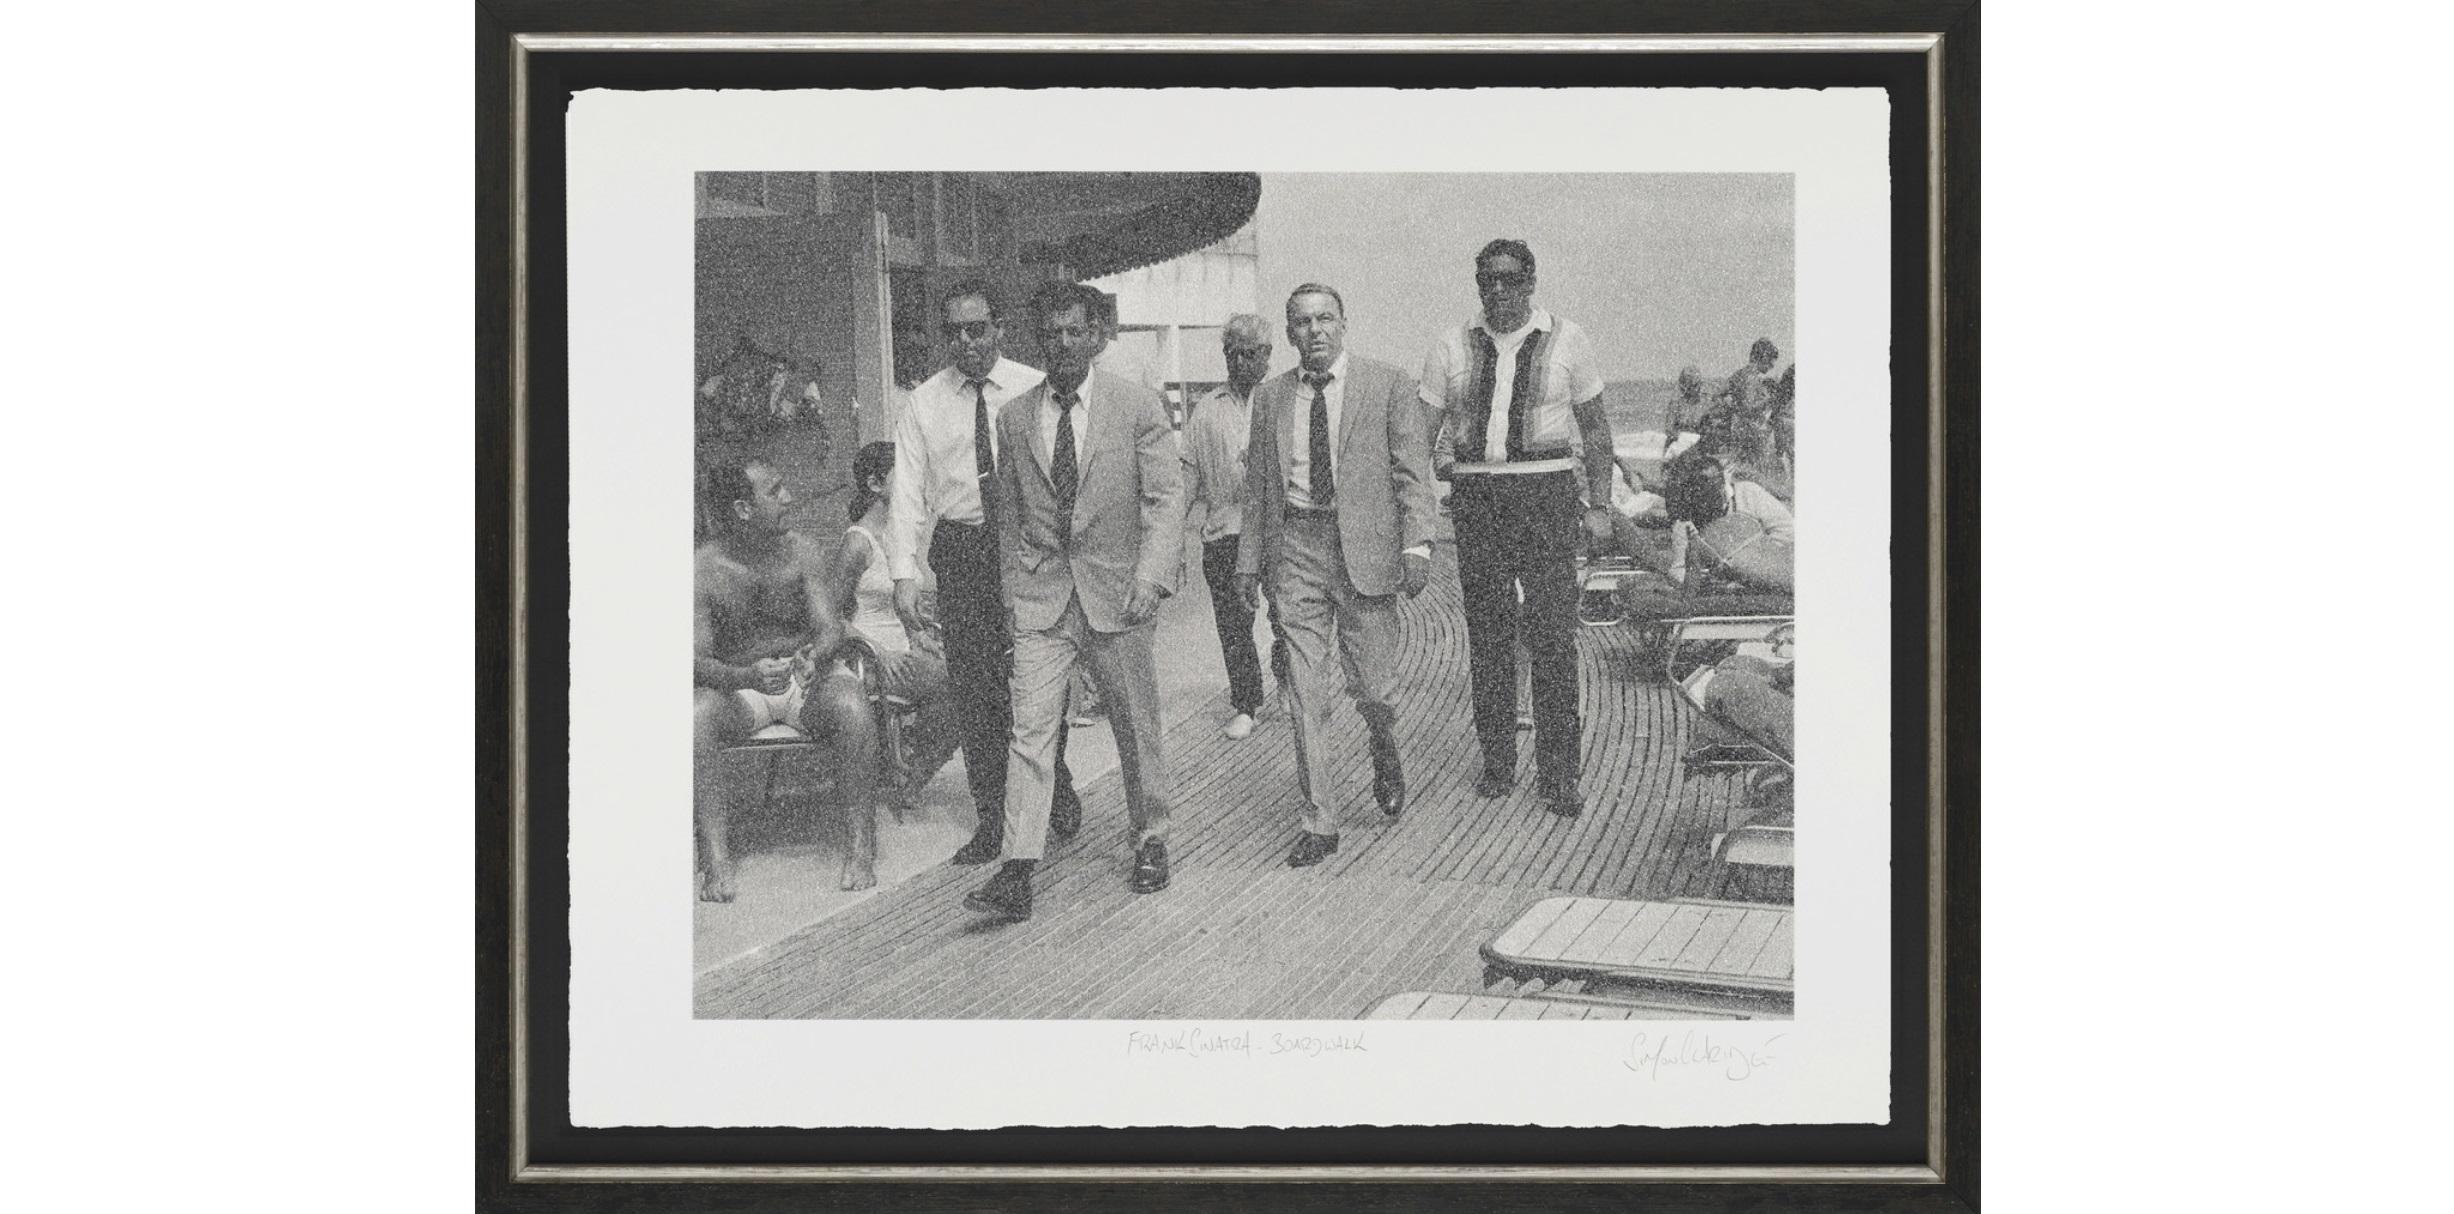 Frank Sinatra Boardwalk, Silkscreen on Paper Painting by Simon Claridge

Whilst working at an art gallery, Simon spent his nights painting feverishly – consumed by the dream of one day having his own work hanging on the walls. One morning, he